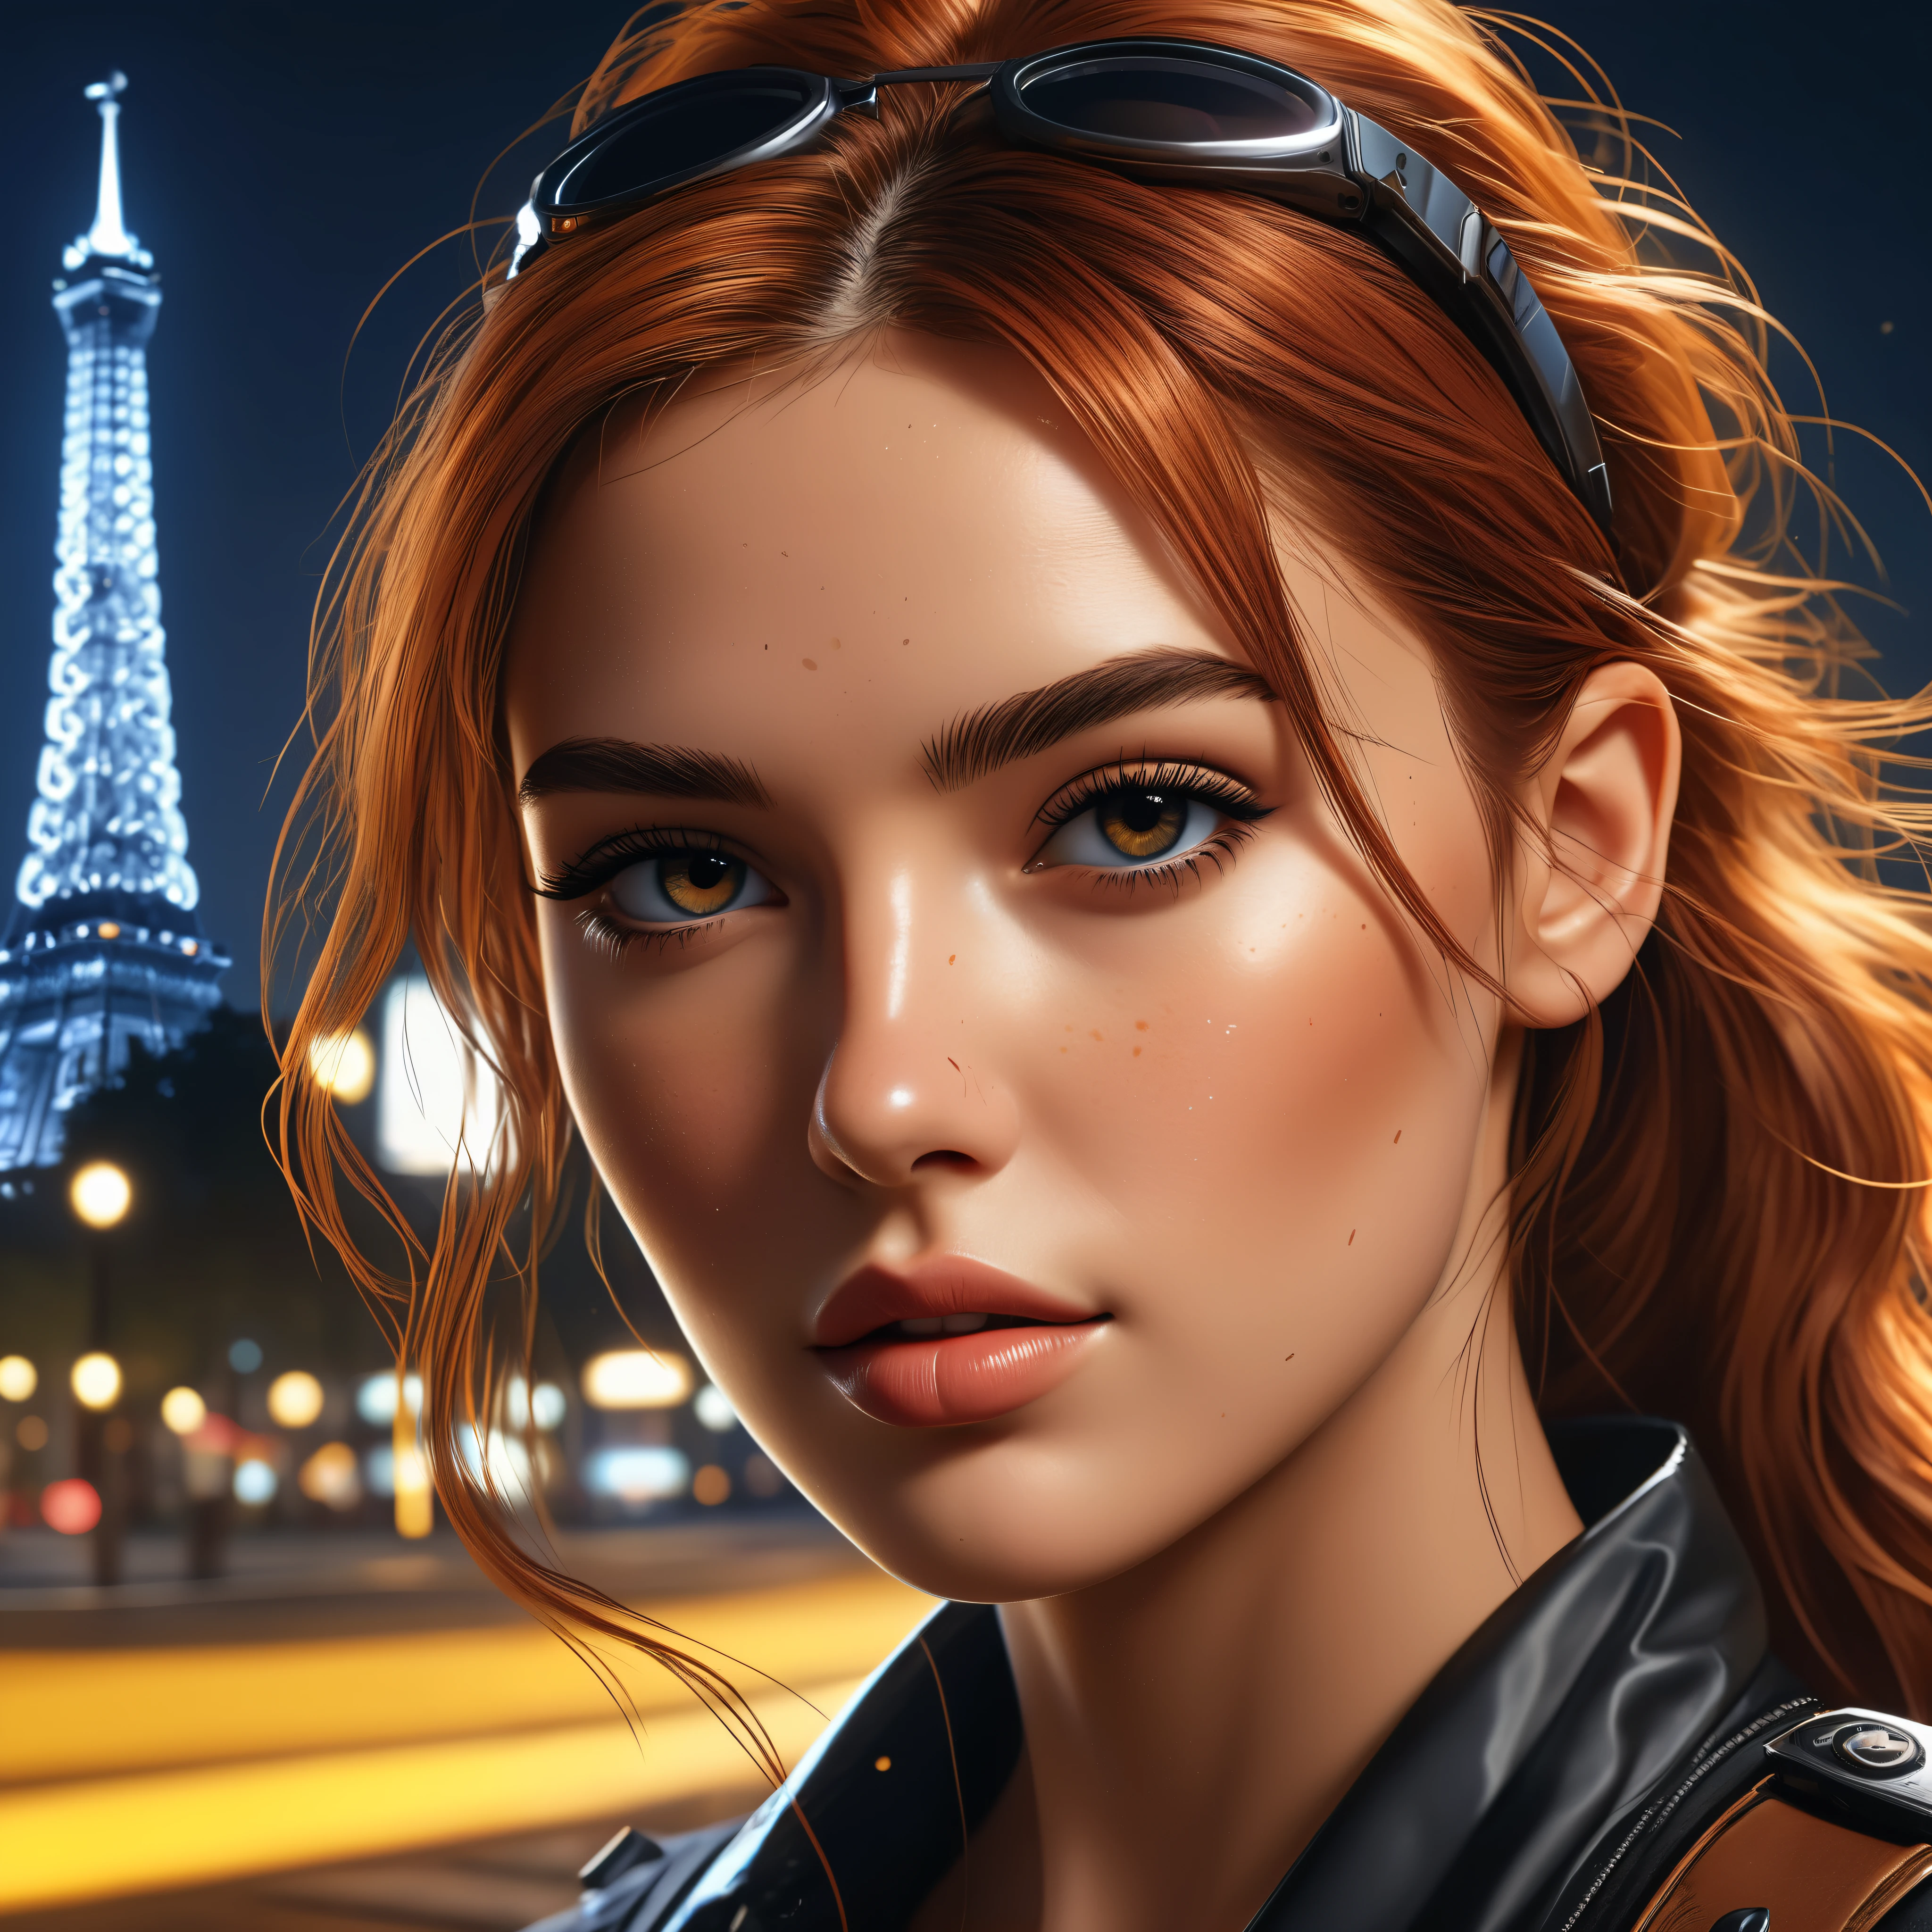 ((Masterpiece in maximum 16K resolution):1.6), ((vector cartoon illustration:)1.5), ((Vector art):1.4), ((Geometric style and minimalism):1.5), ((Wide angle painting):1.2) | (Cyberpunk Vector Art of a Fresh Supermodel beauty in Paris), (Cyberpunk Fresh French Supermodel beauty), (Dynamic Pose), (Cute Freckles), (Red Hair), (Golden Ratio Face), (Cute Freckles), (visual experience), award-winning graphics, extremely detailed, Digital Art, rtx, Unreal Engine, All drawn with sharp focus. Rendered in ultra-high definition with UHD and retina quality, this masterpiece ensures anatomical correctness and textured skin with super detail. With a focus on high quality and accuracy, this award-winning portrayal captures every nuance in stunning 16k resolution, immersing viewers in its lifelike depiction. Avoid extreme angles or exaggerated expressions to maintain realism. ((perfect_composition, perfect_design, perfect_layout, perfect_detail, ultra_detailed)), ((enhance_all, fix_everything)), More Detail, Enhance. 